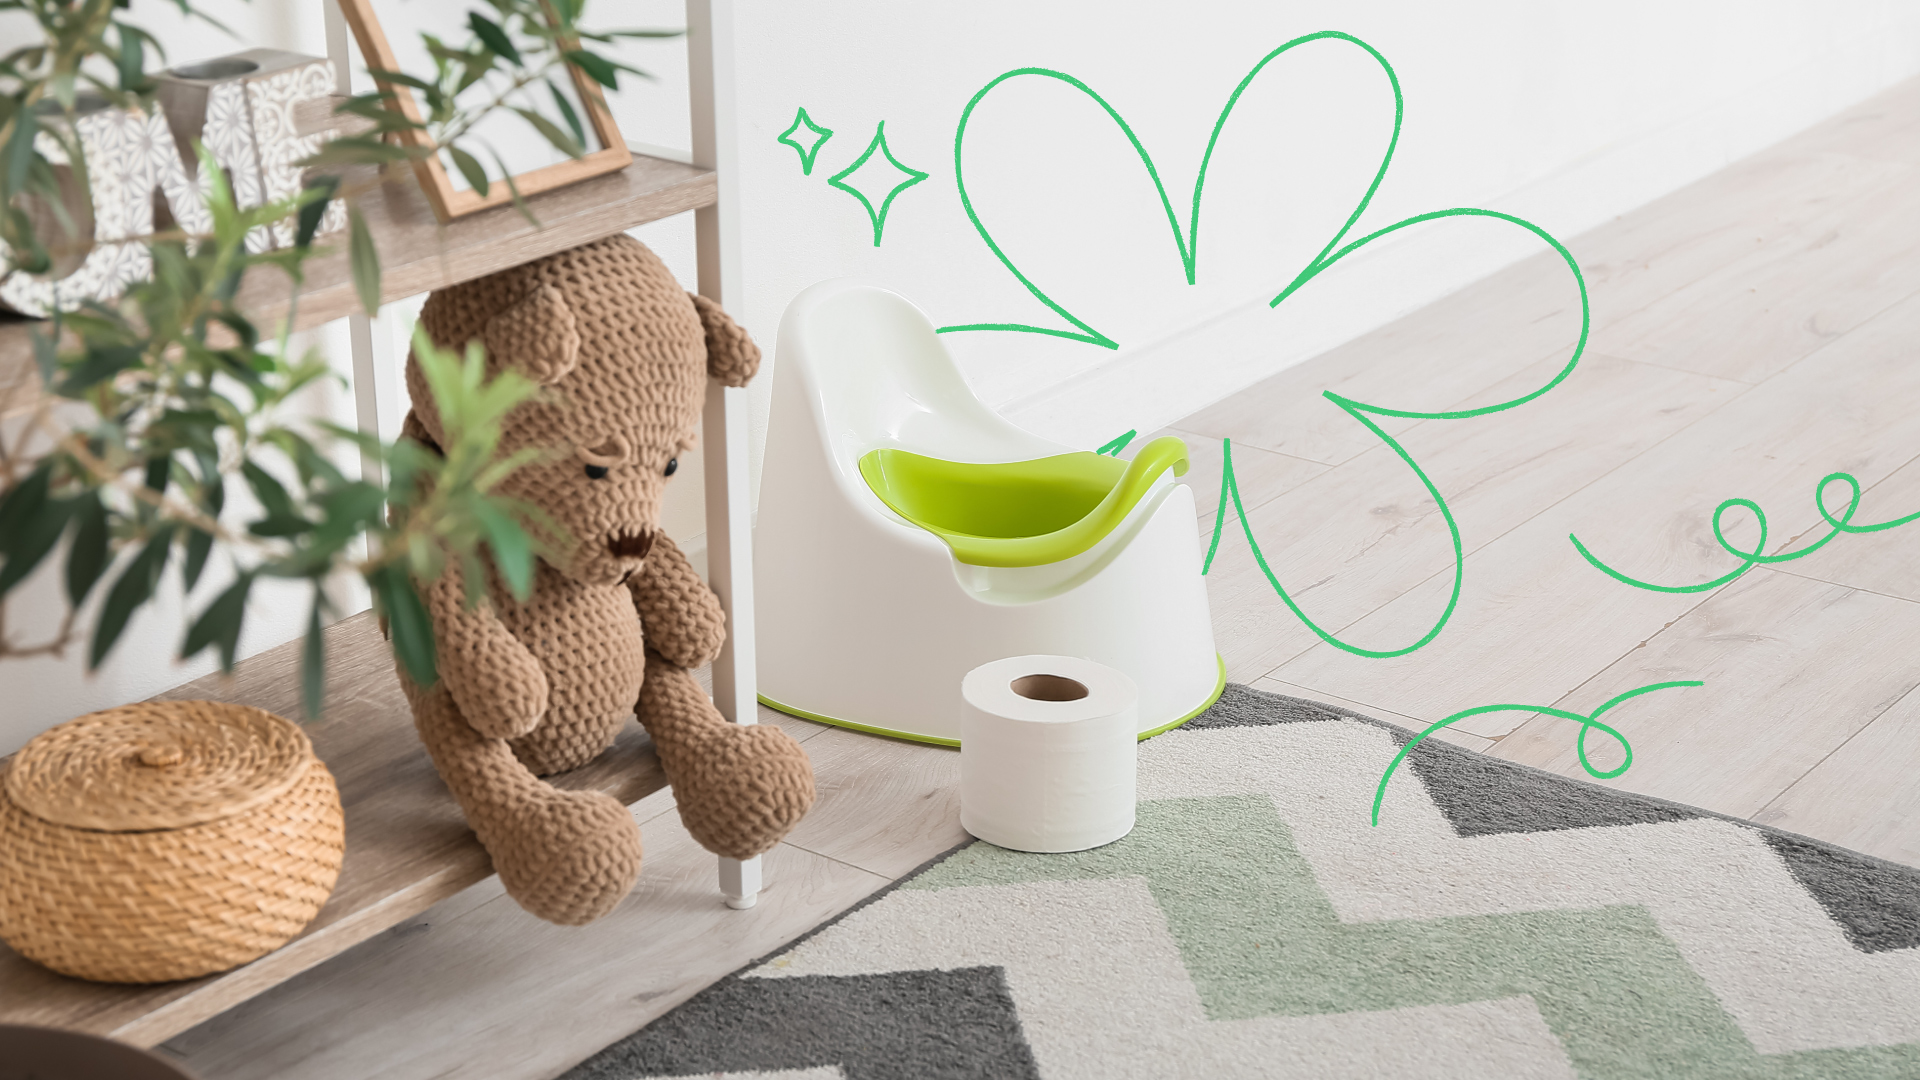 How to Choose the Best Potty Training Method